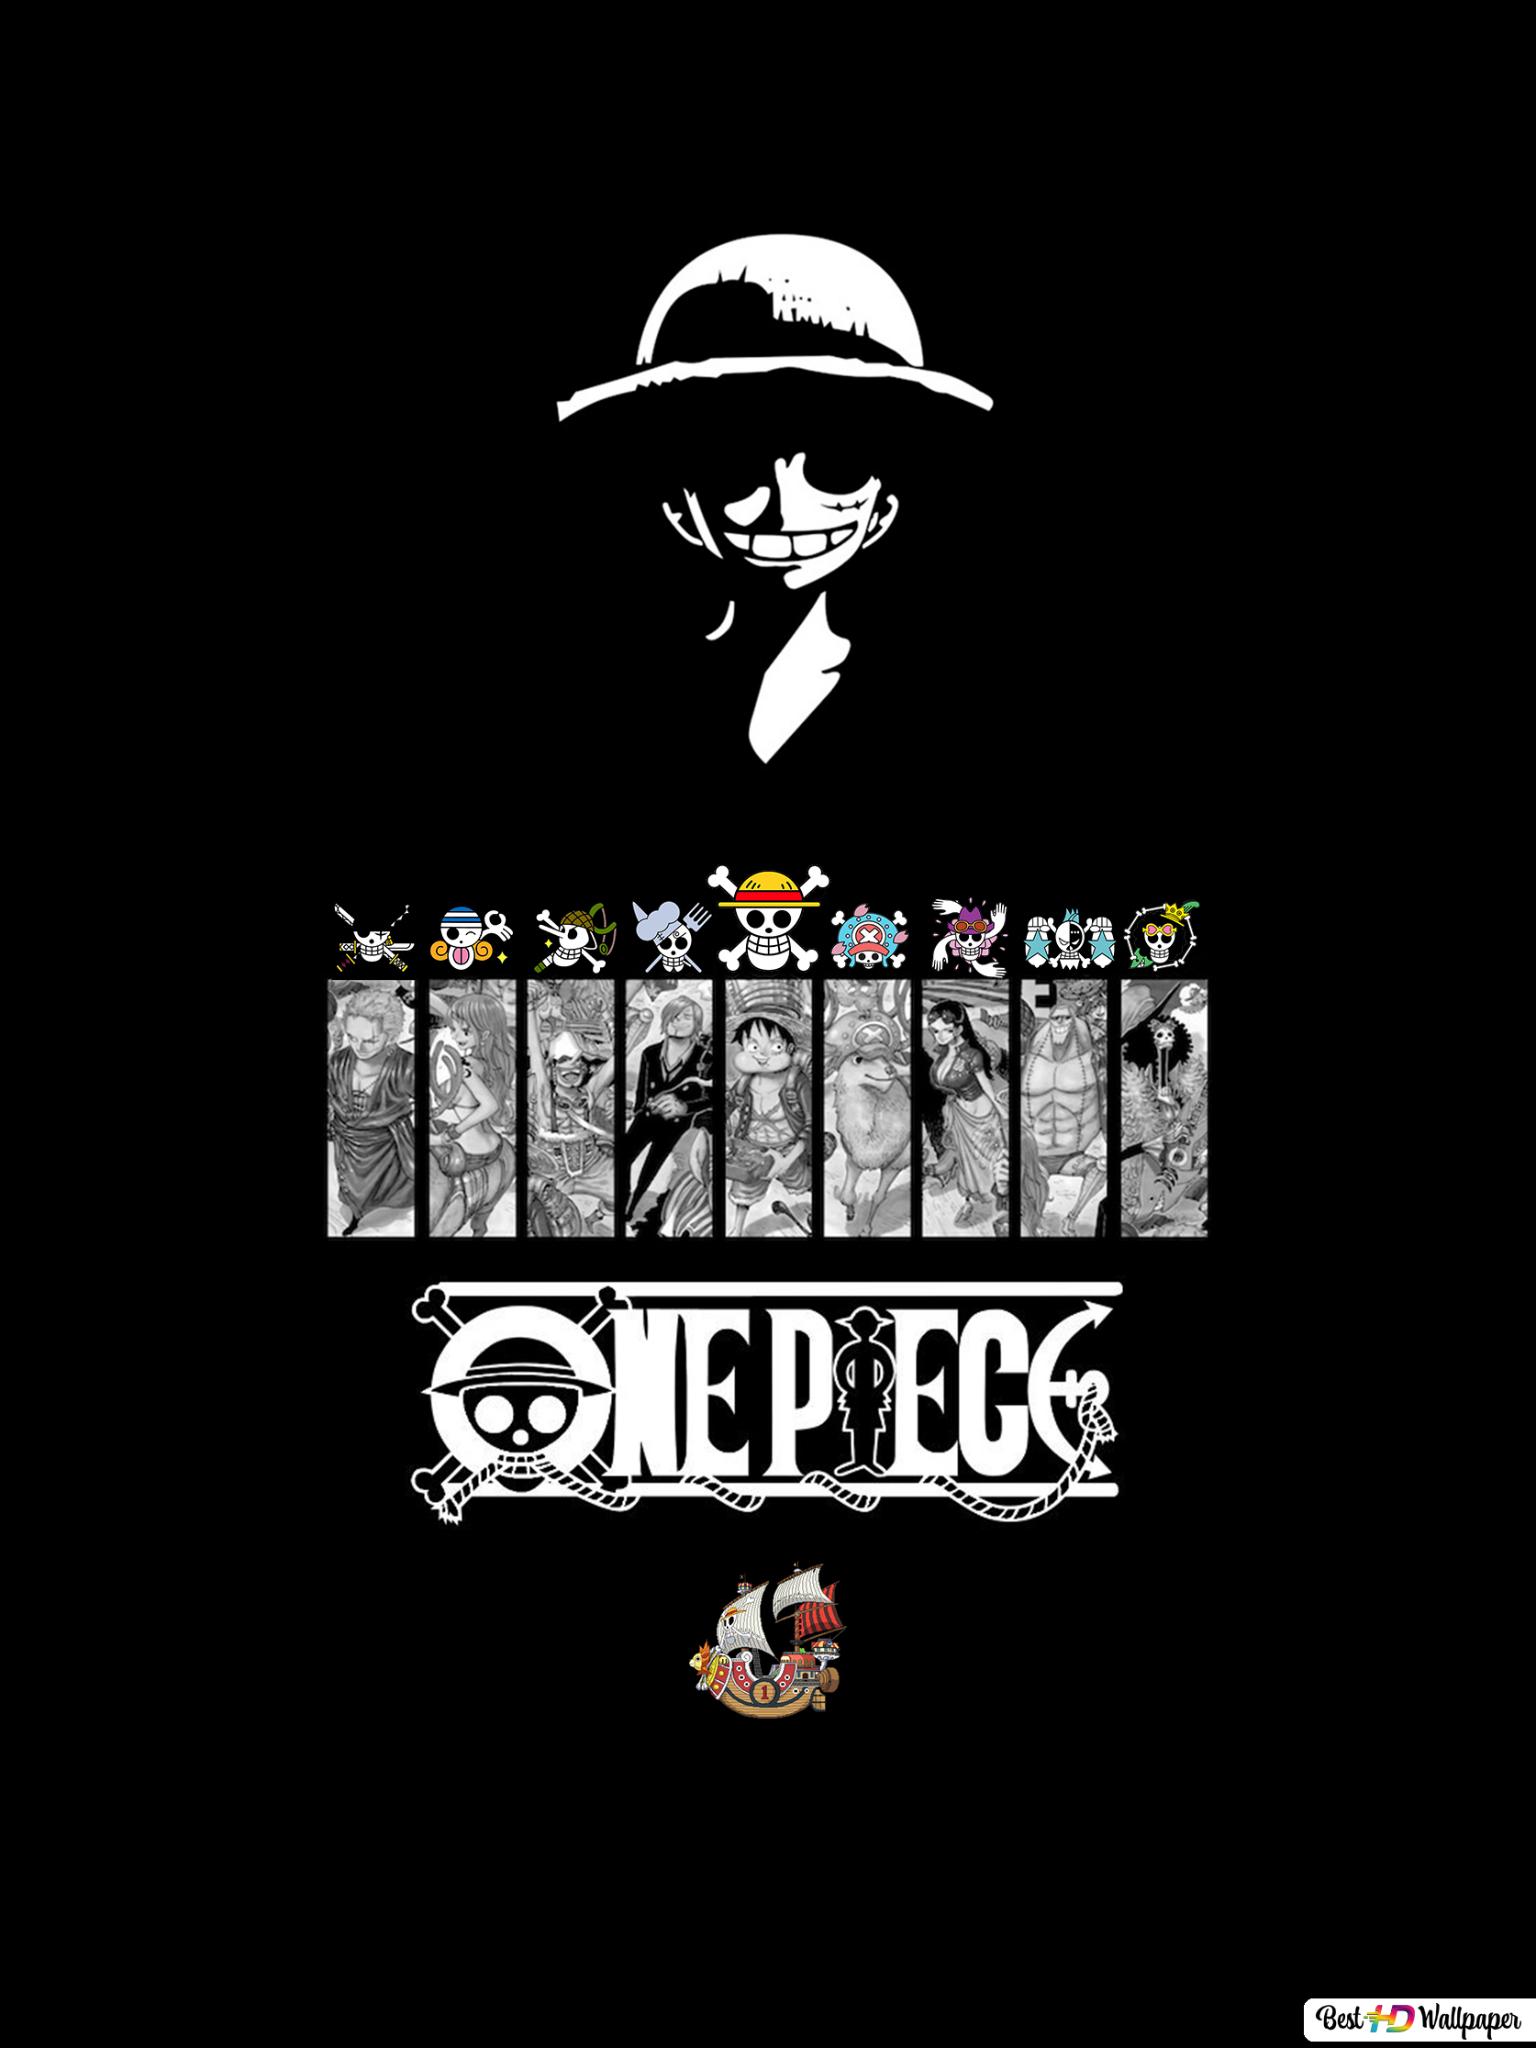 One Piece Wallpaper for mobile phone, tablet, desktop computer and